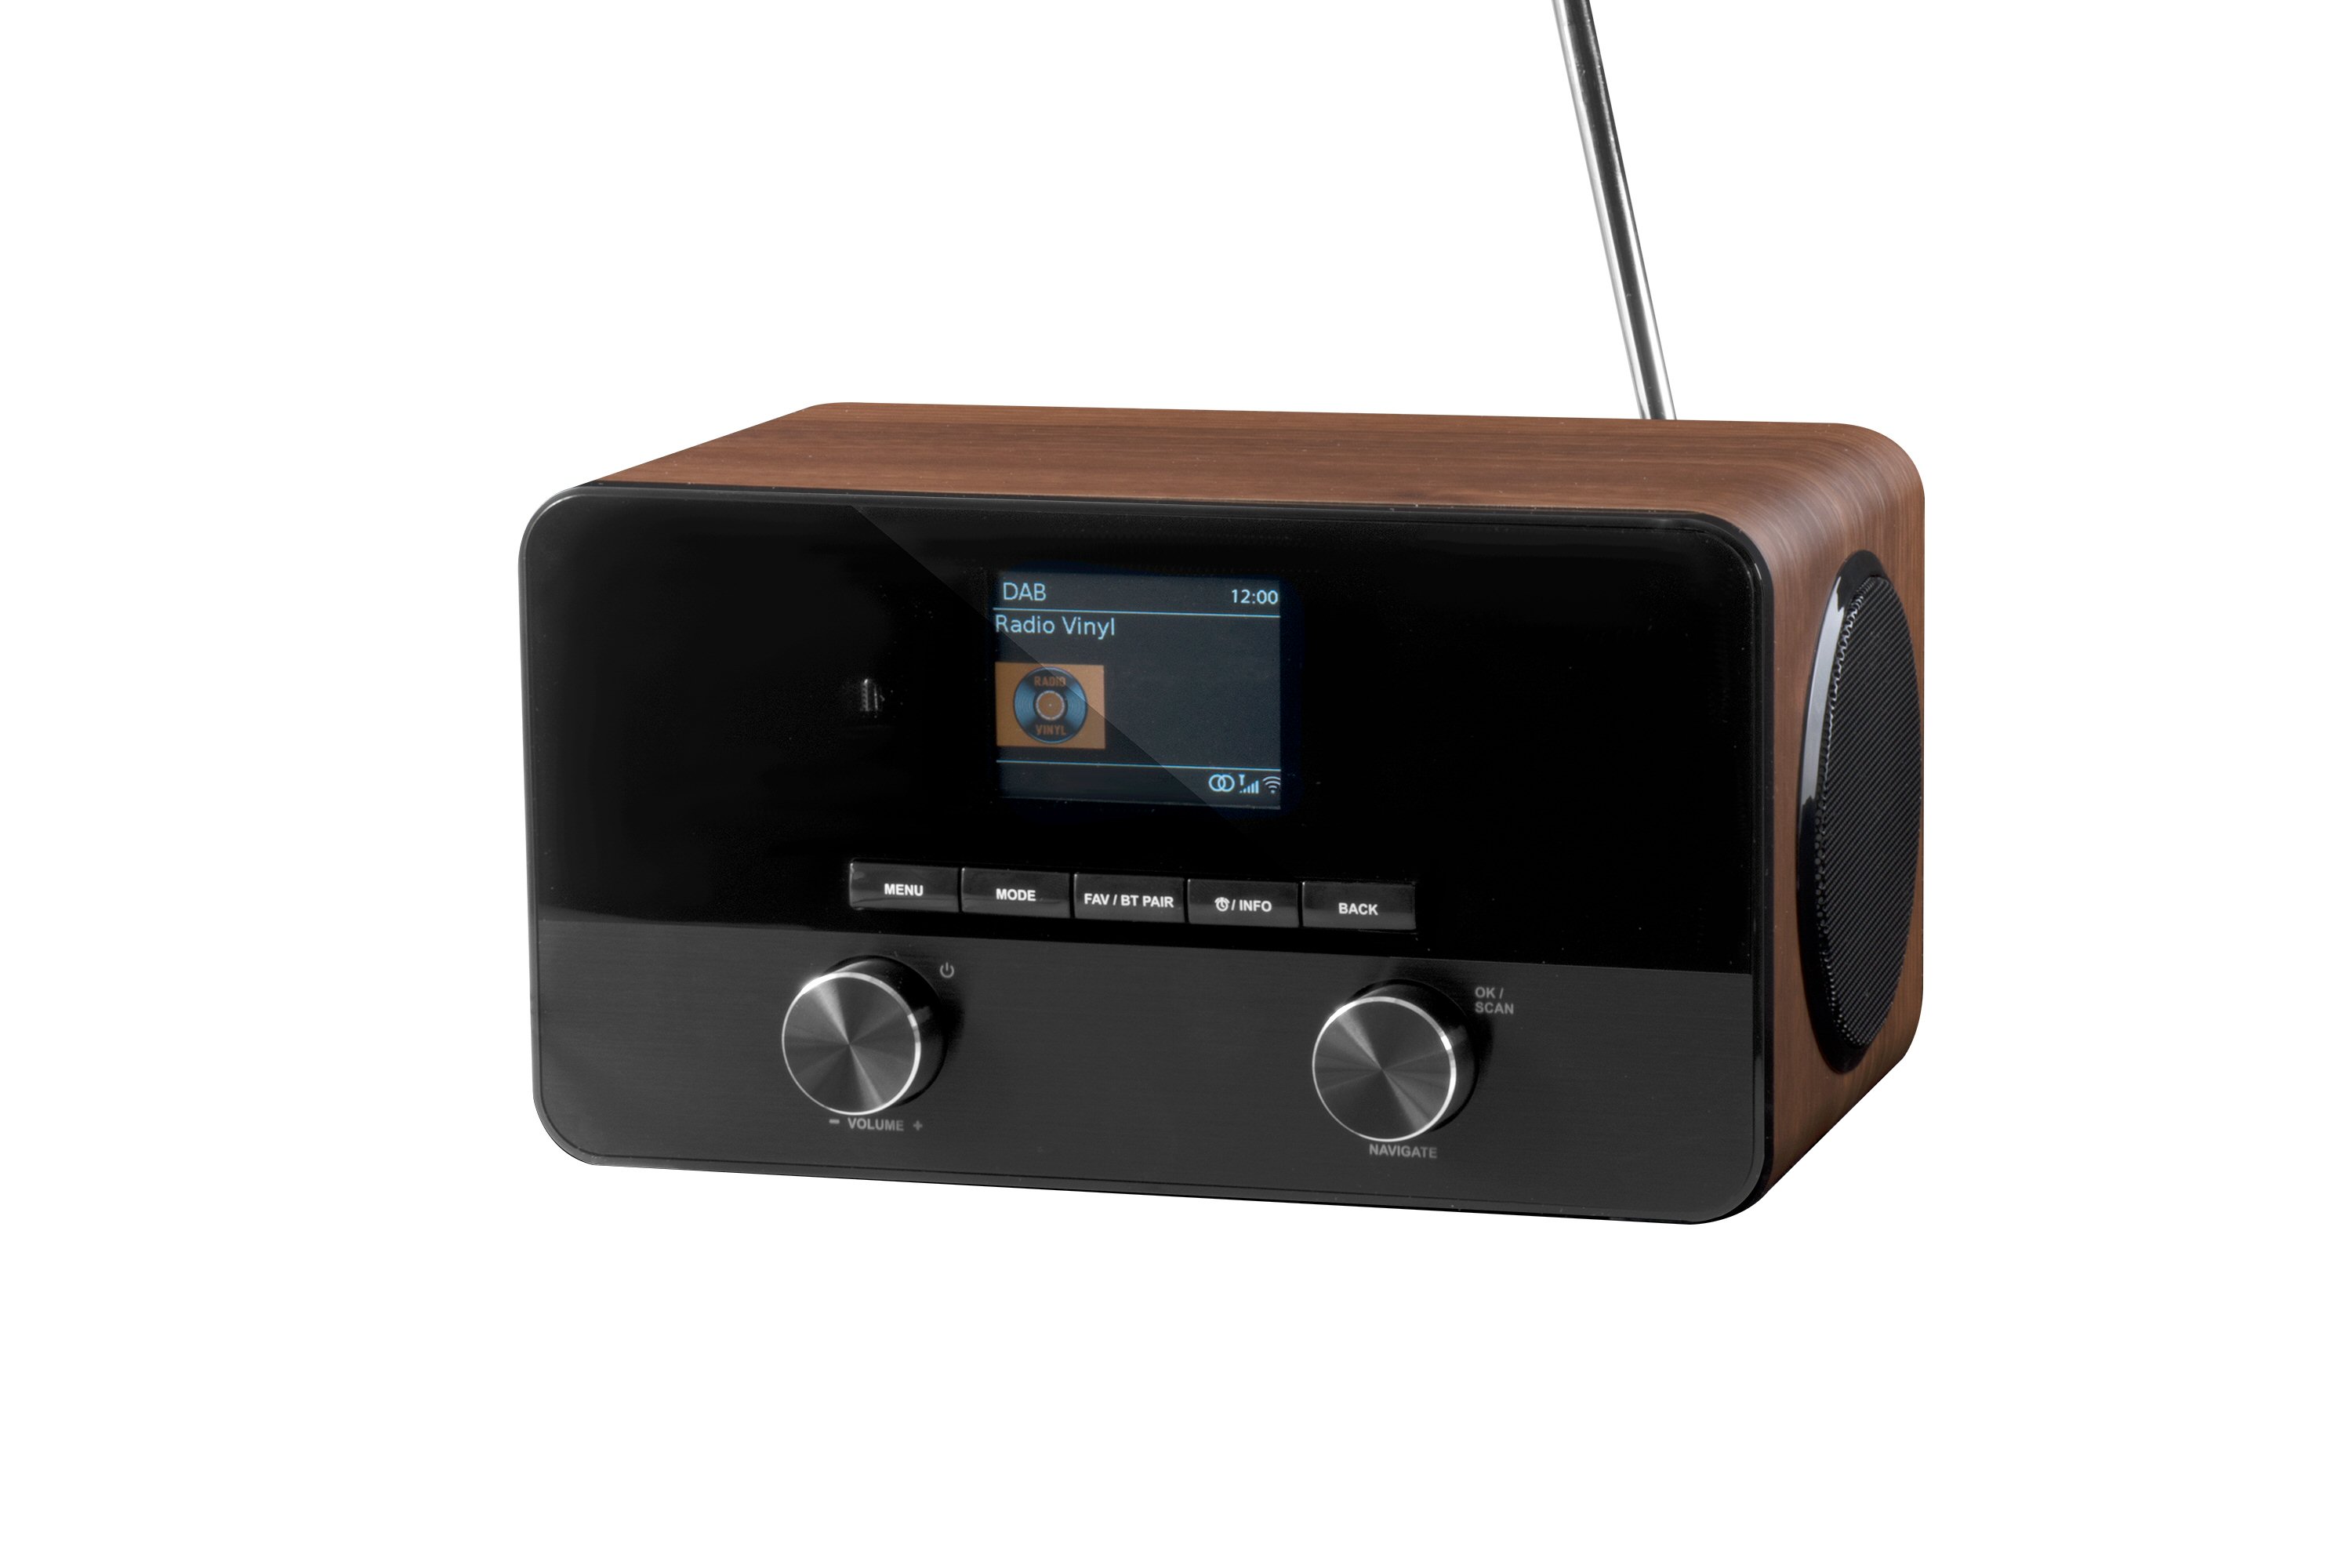 1670 All-in-1 WiFi stereo radio